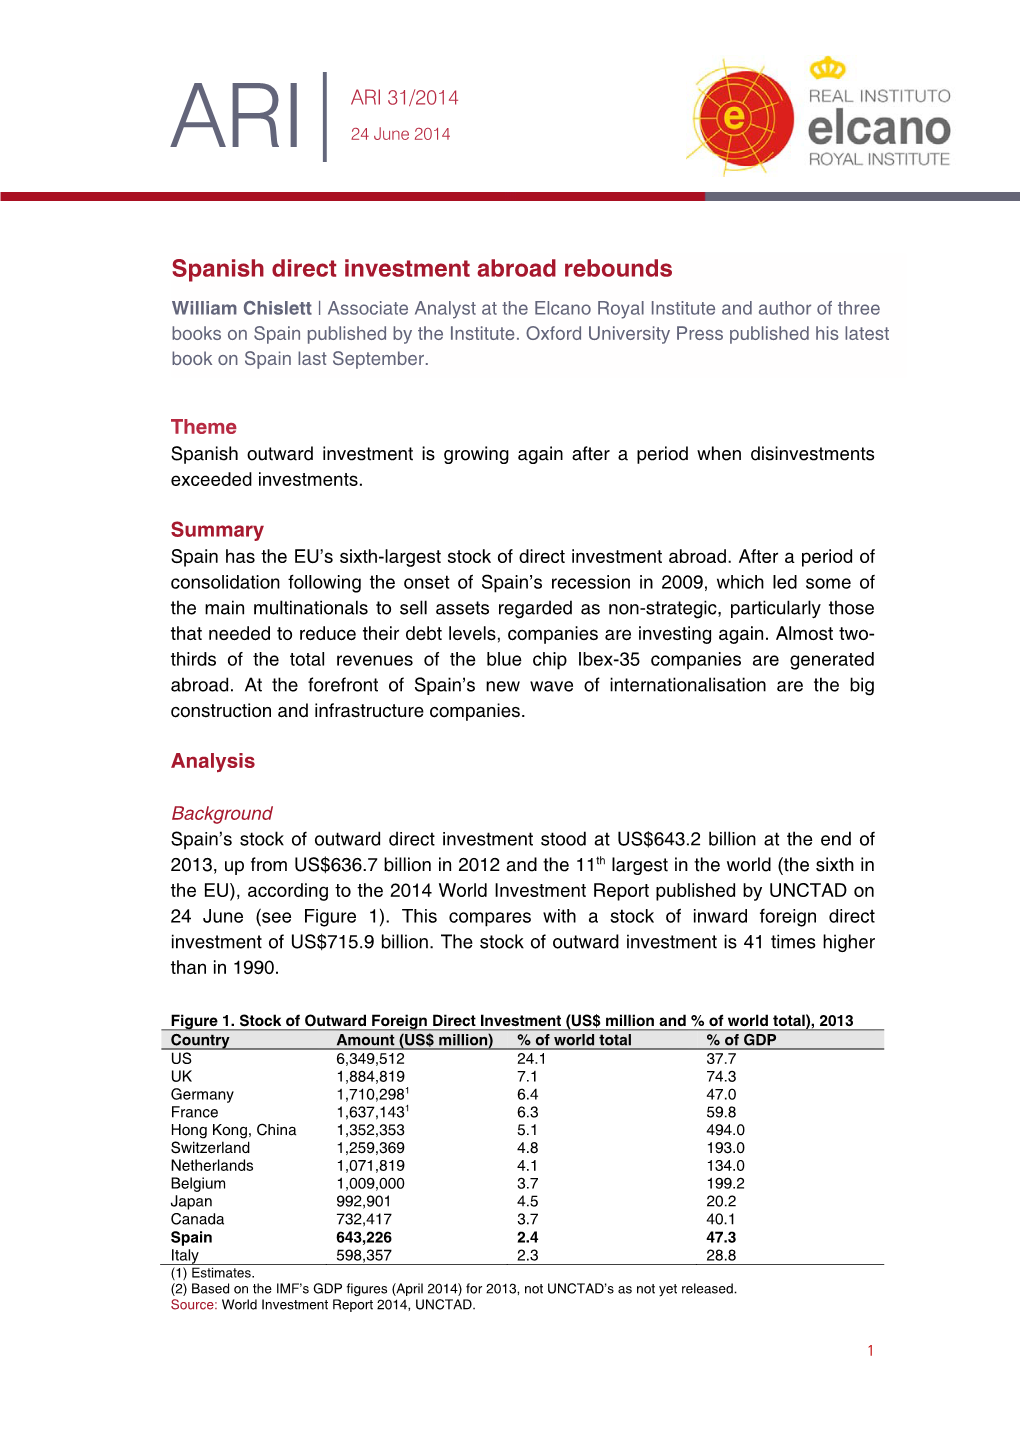 Spanish Direct Investment Abroad Rebounds